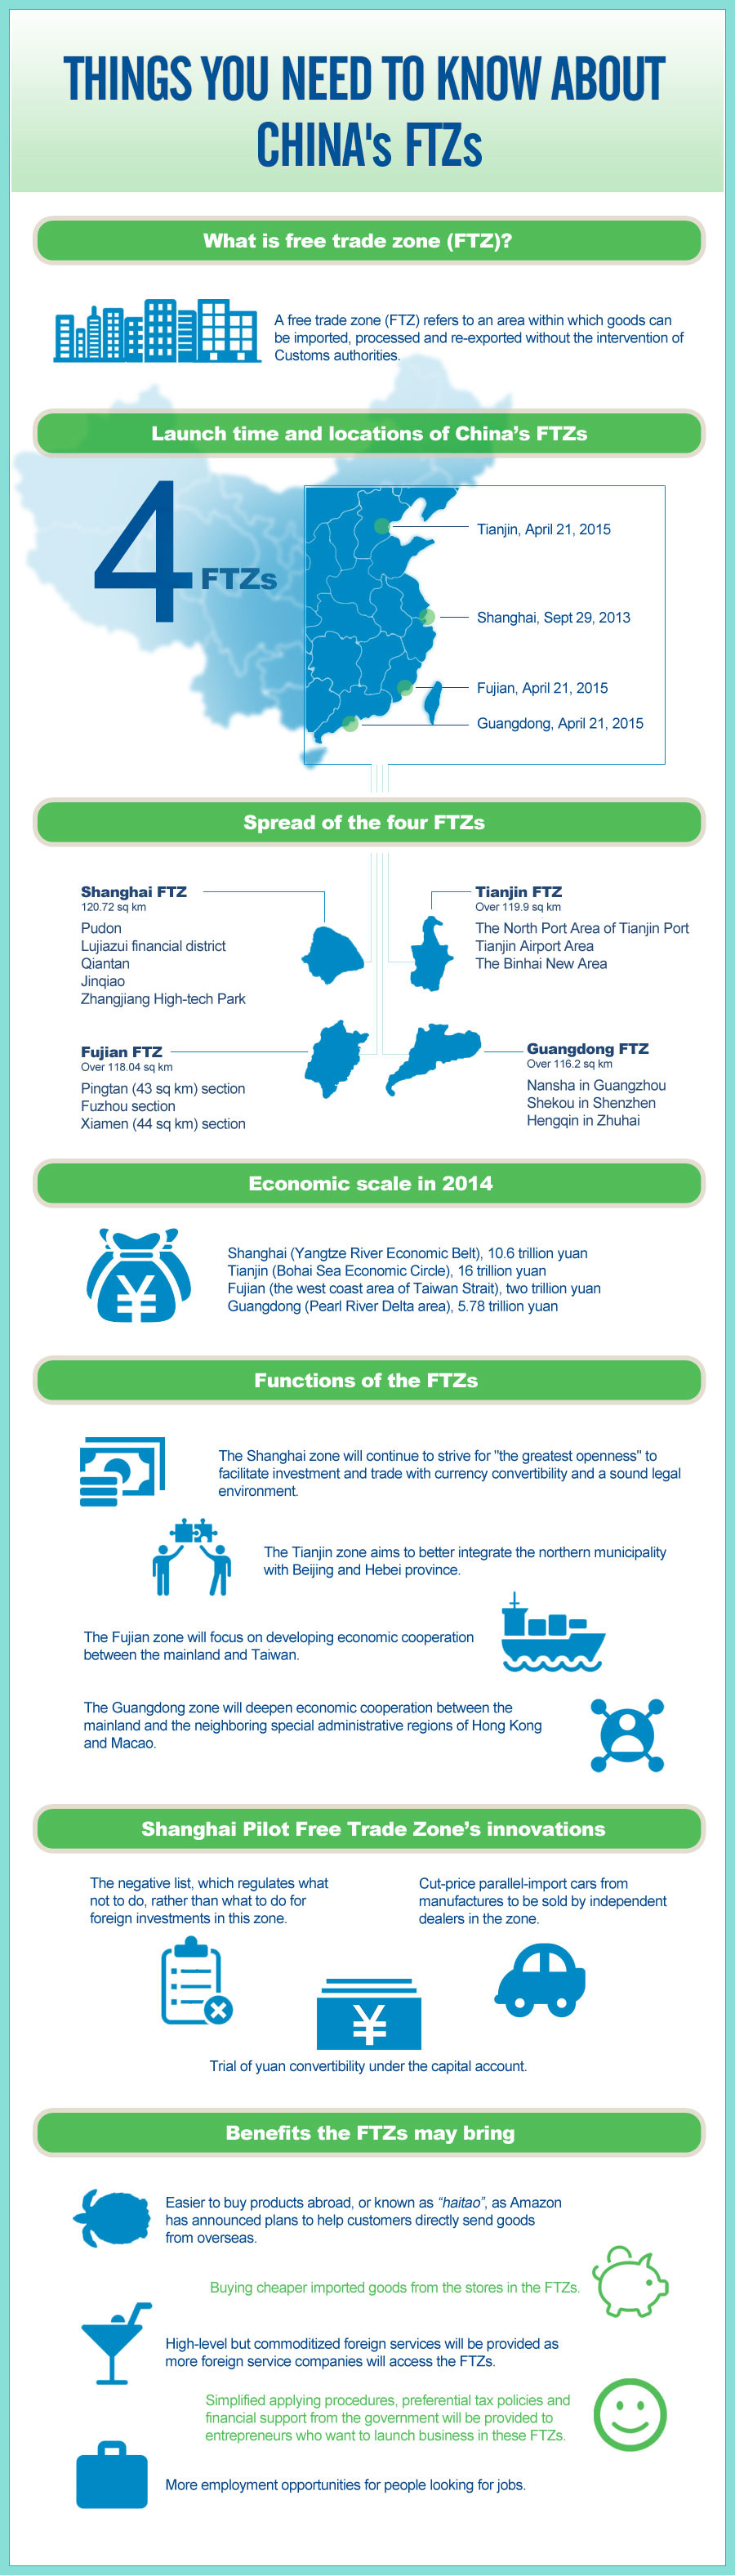 Things you need to know about China's FTZs